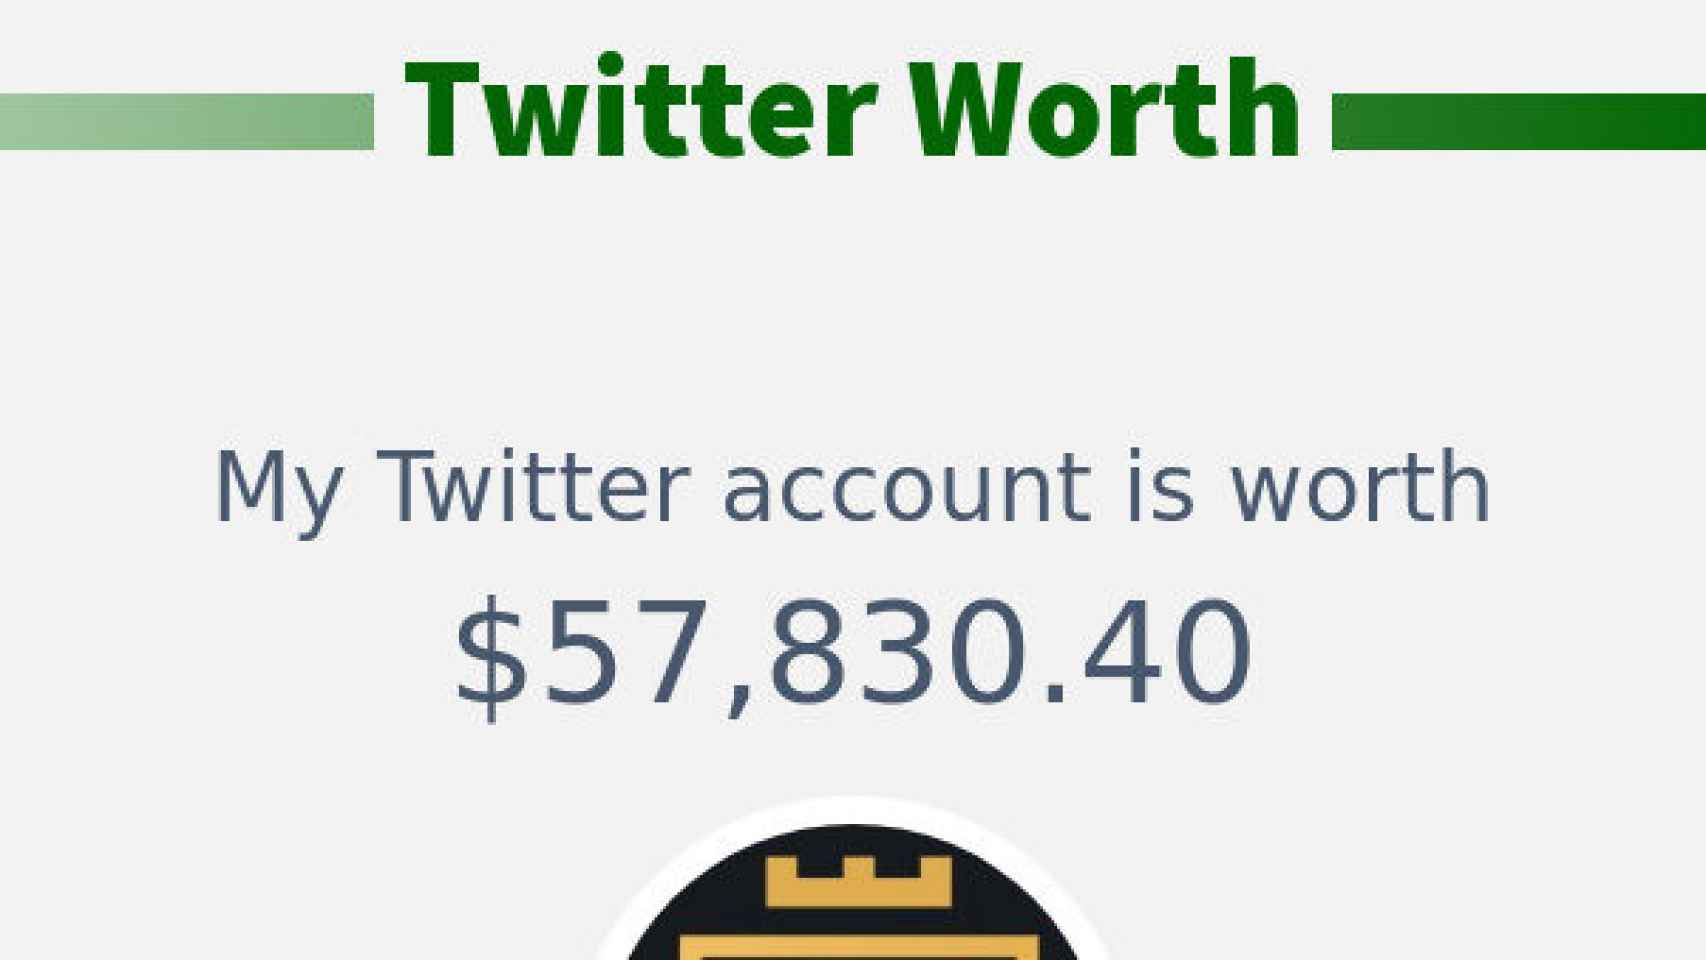 The application that supposedly calculates the value of our Twitter account